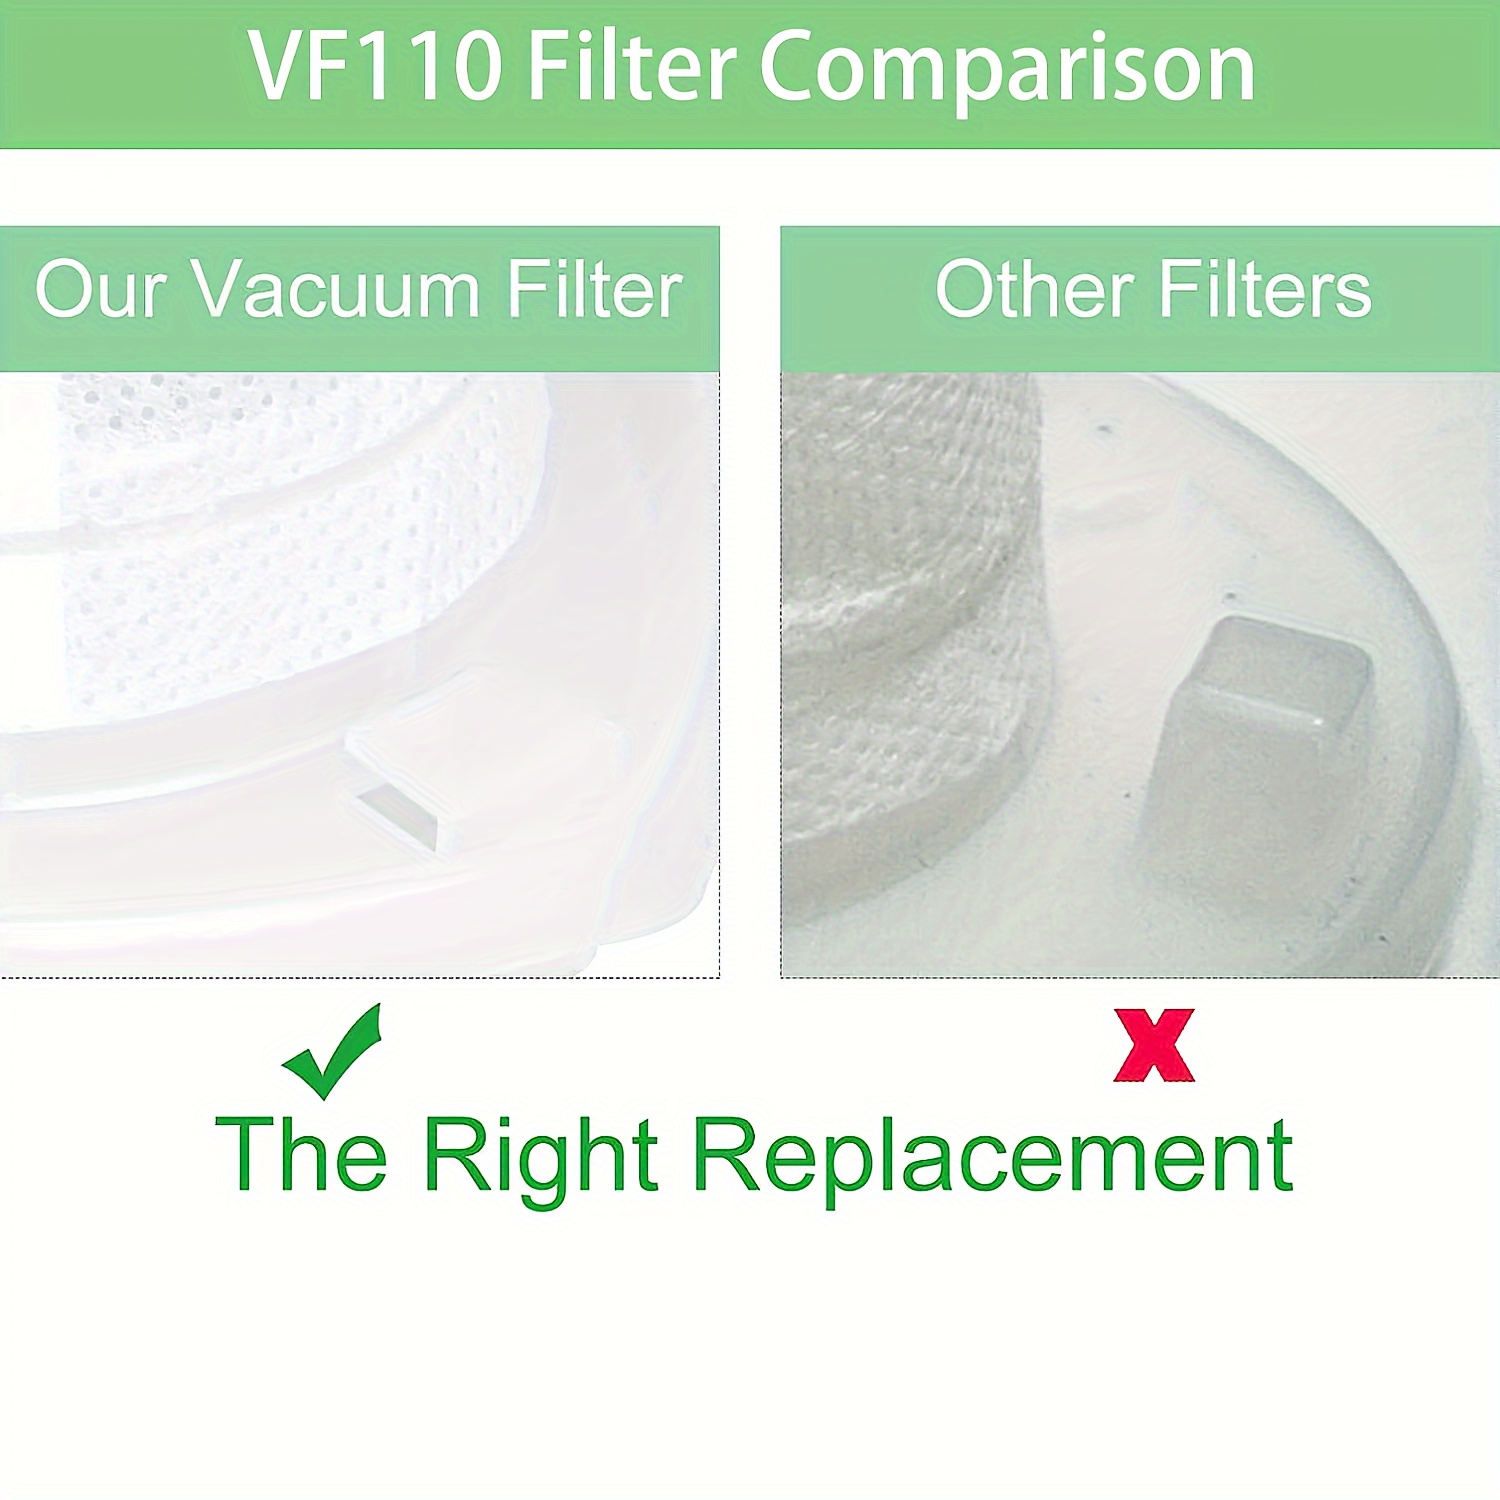 VF110 Black & Decker Hand Vacuum Filter Compatible with Model CHV1410l